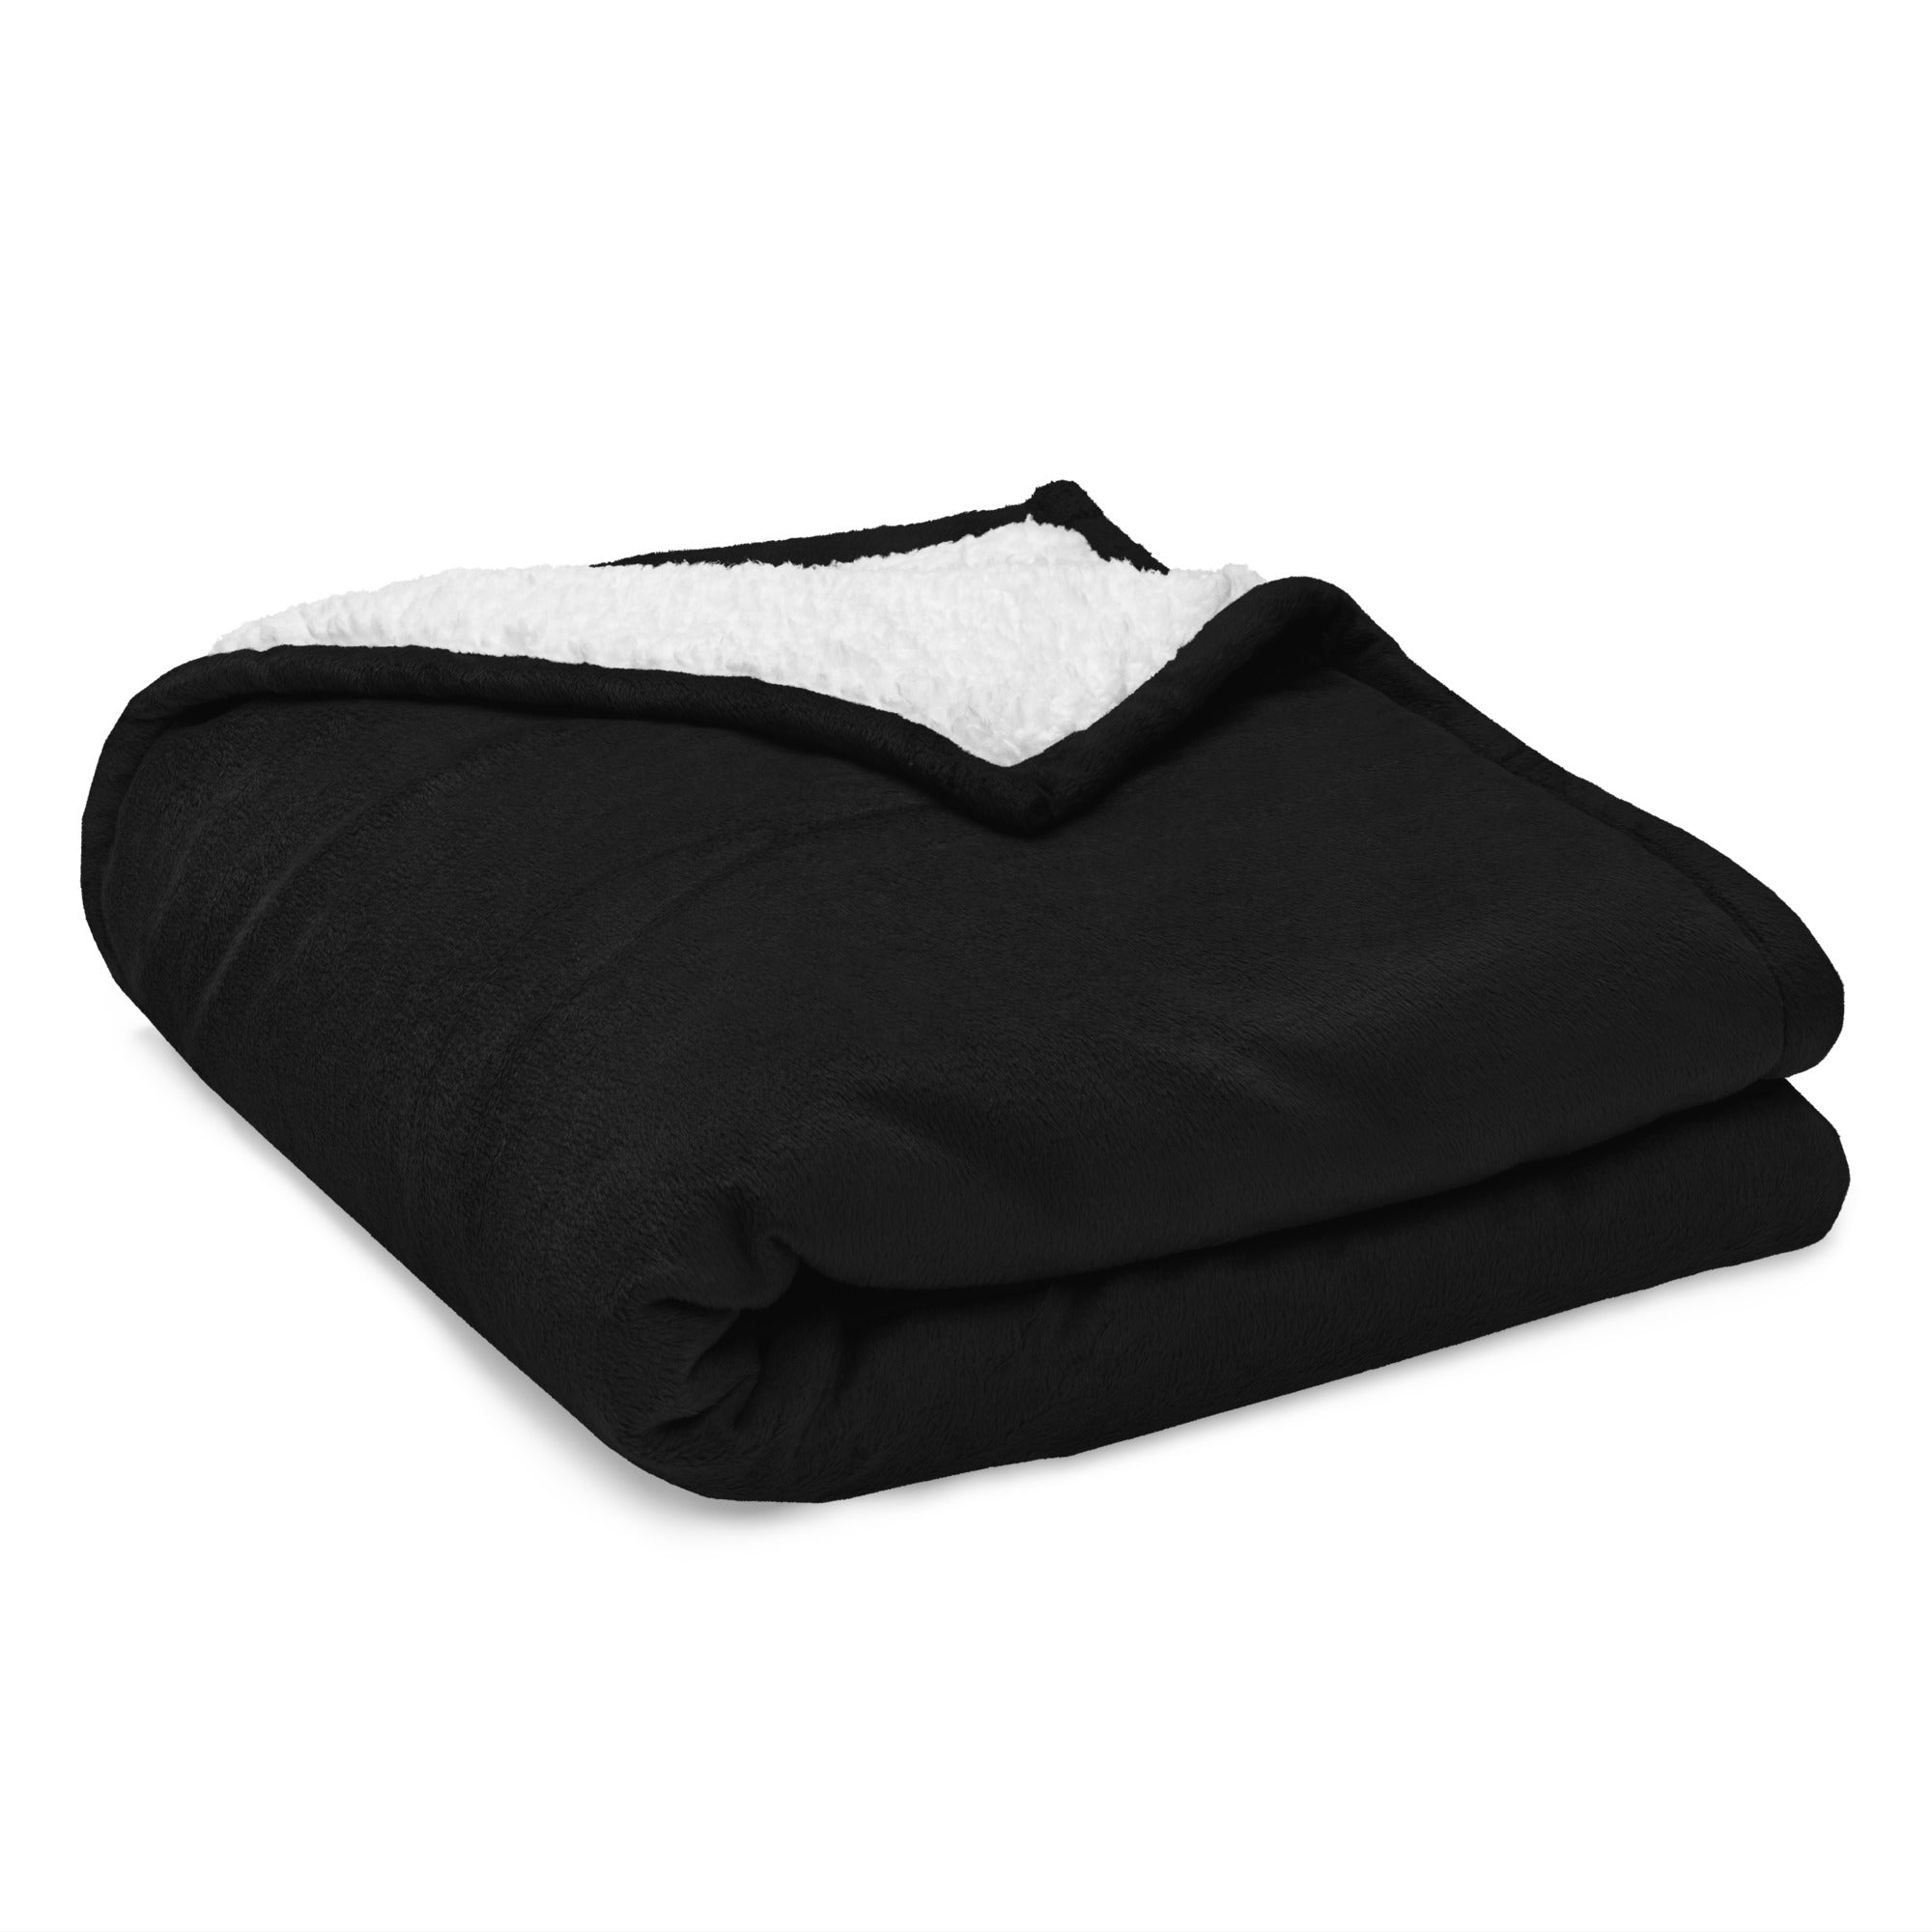 Clubs and Sticks Premium Embroidered Sherpa Blanket